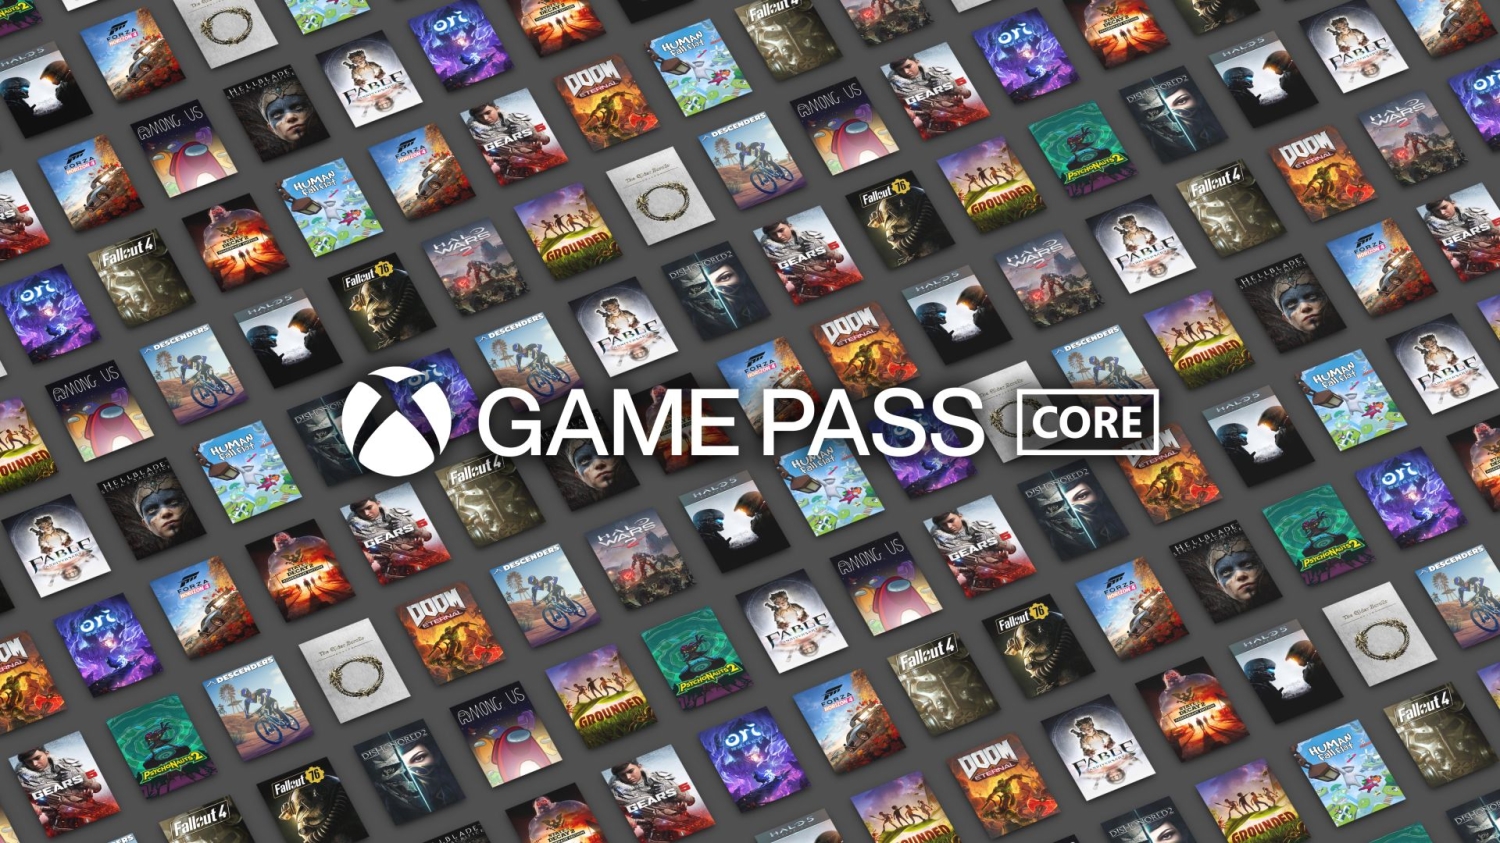 Activision shares update on when its games will join Xbox Game Pass